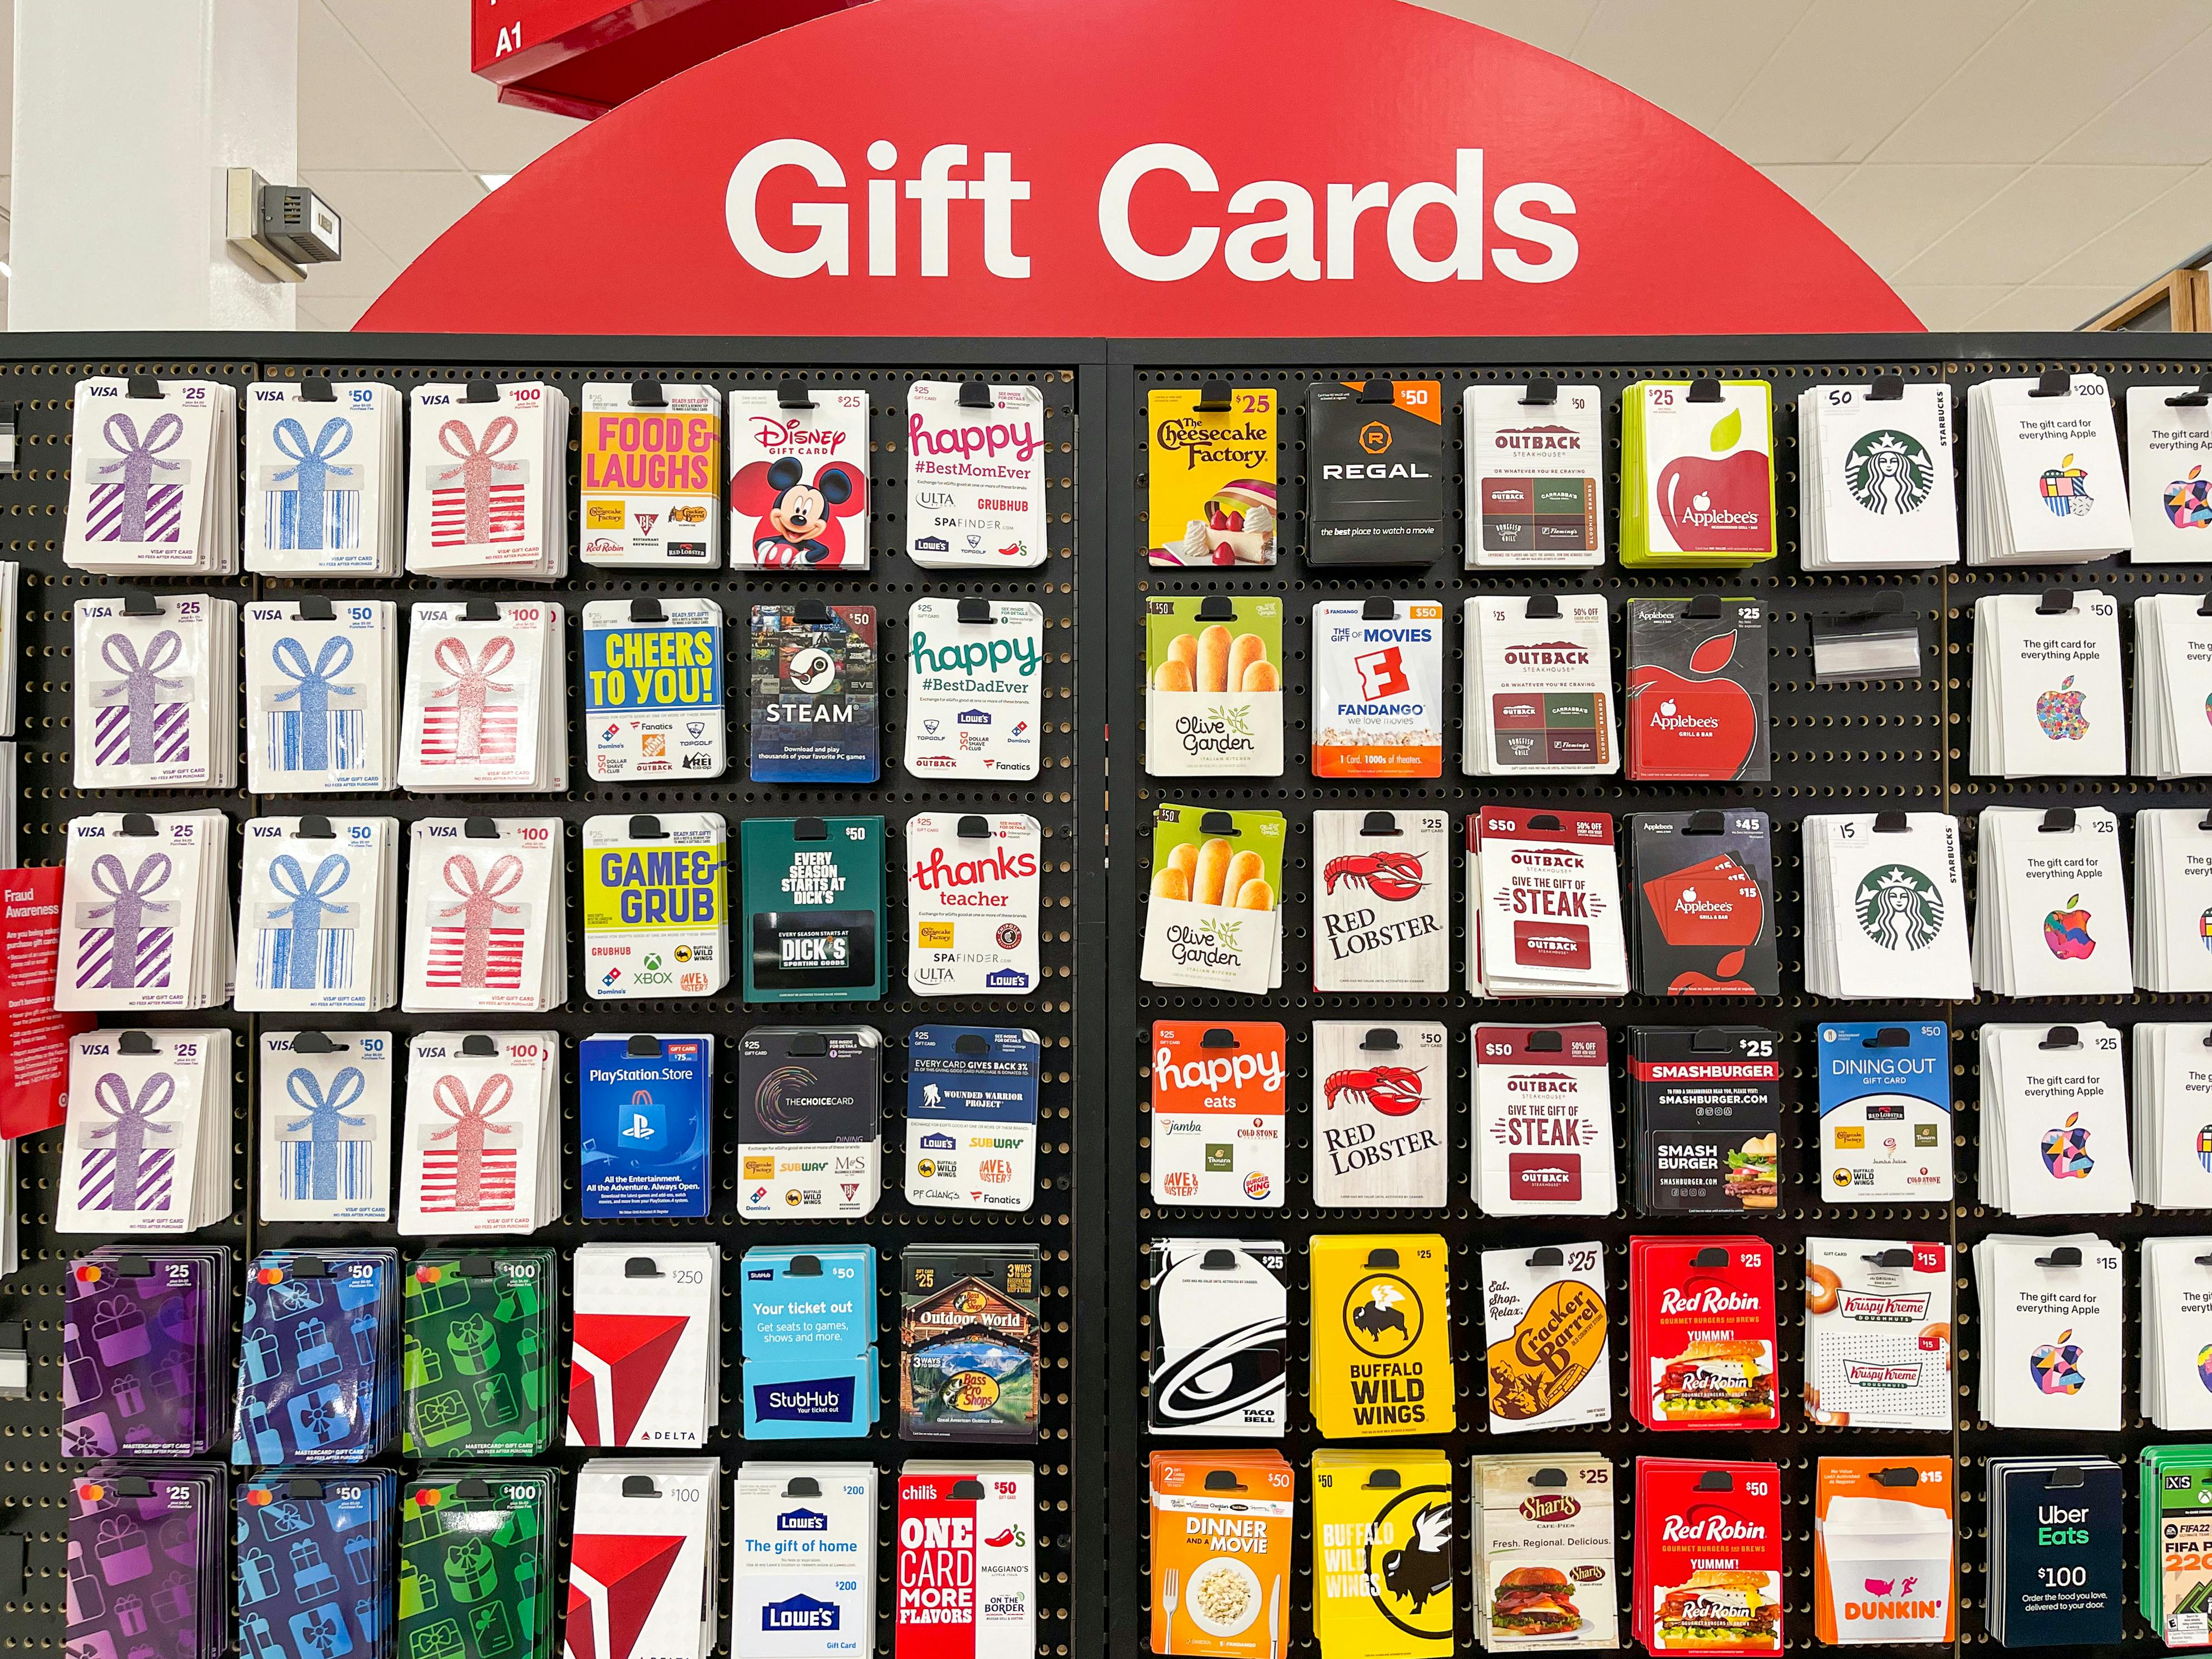 Are Amazon Gift Cards Sold in Stores?